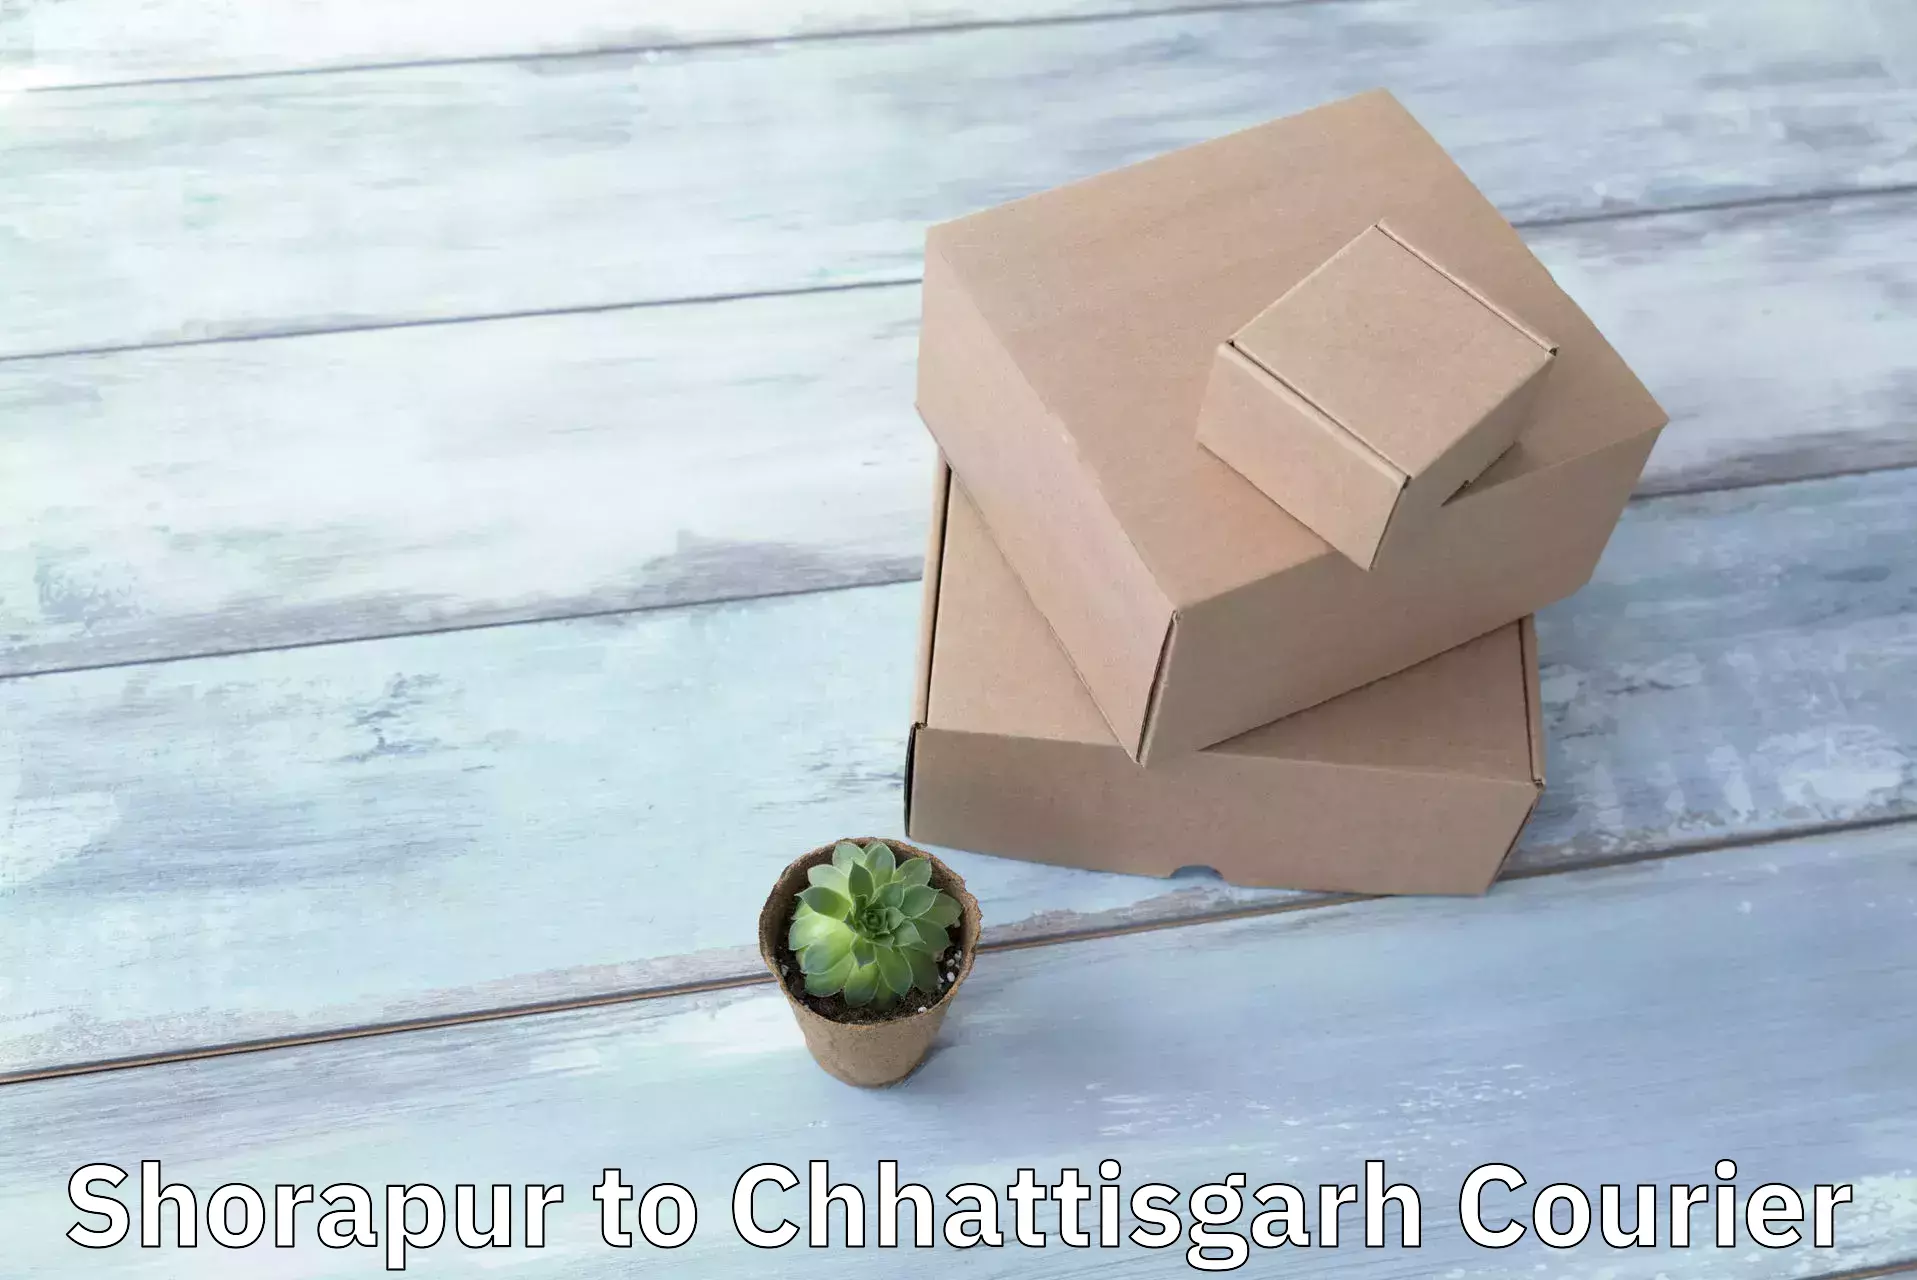 State-of-the-art courier technology Shorapur to Chhattisgarh